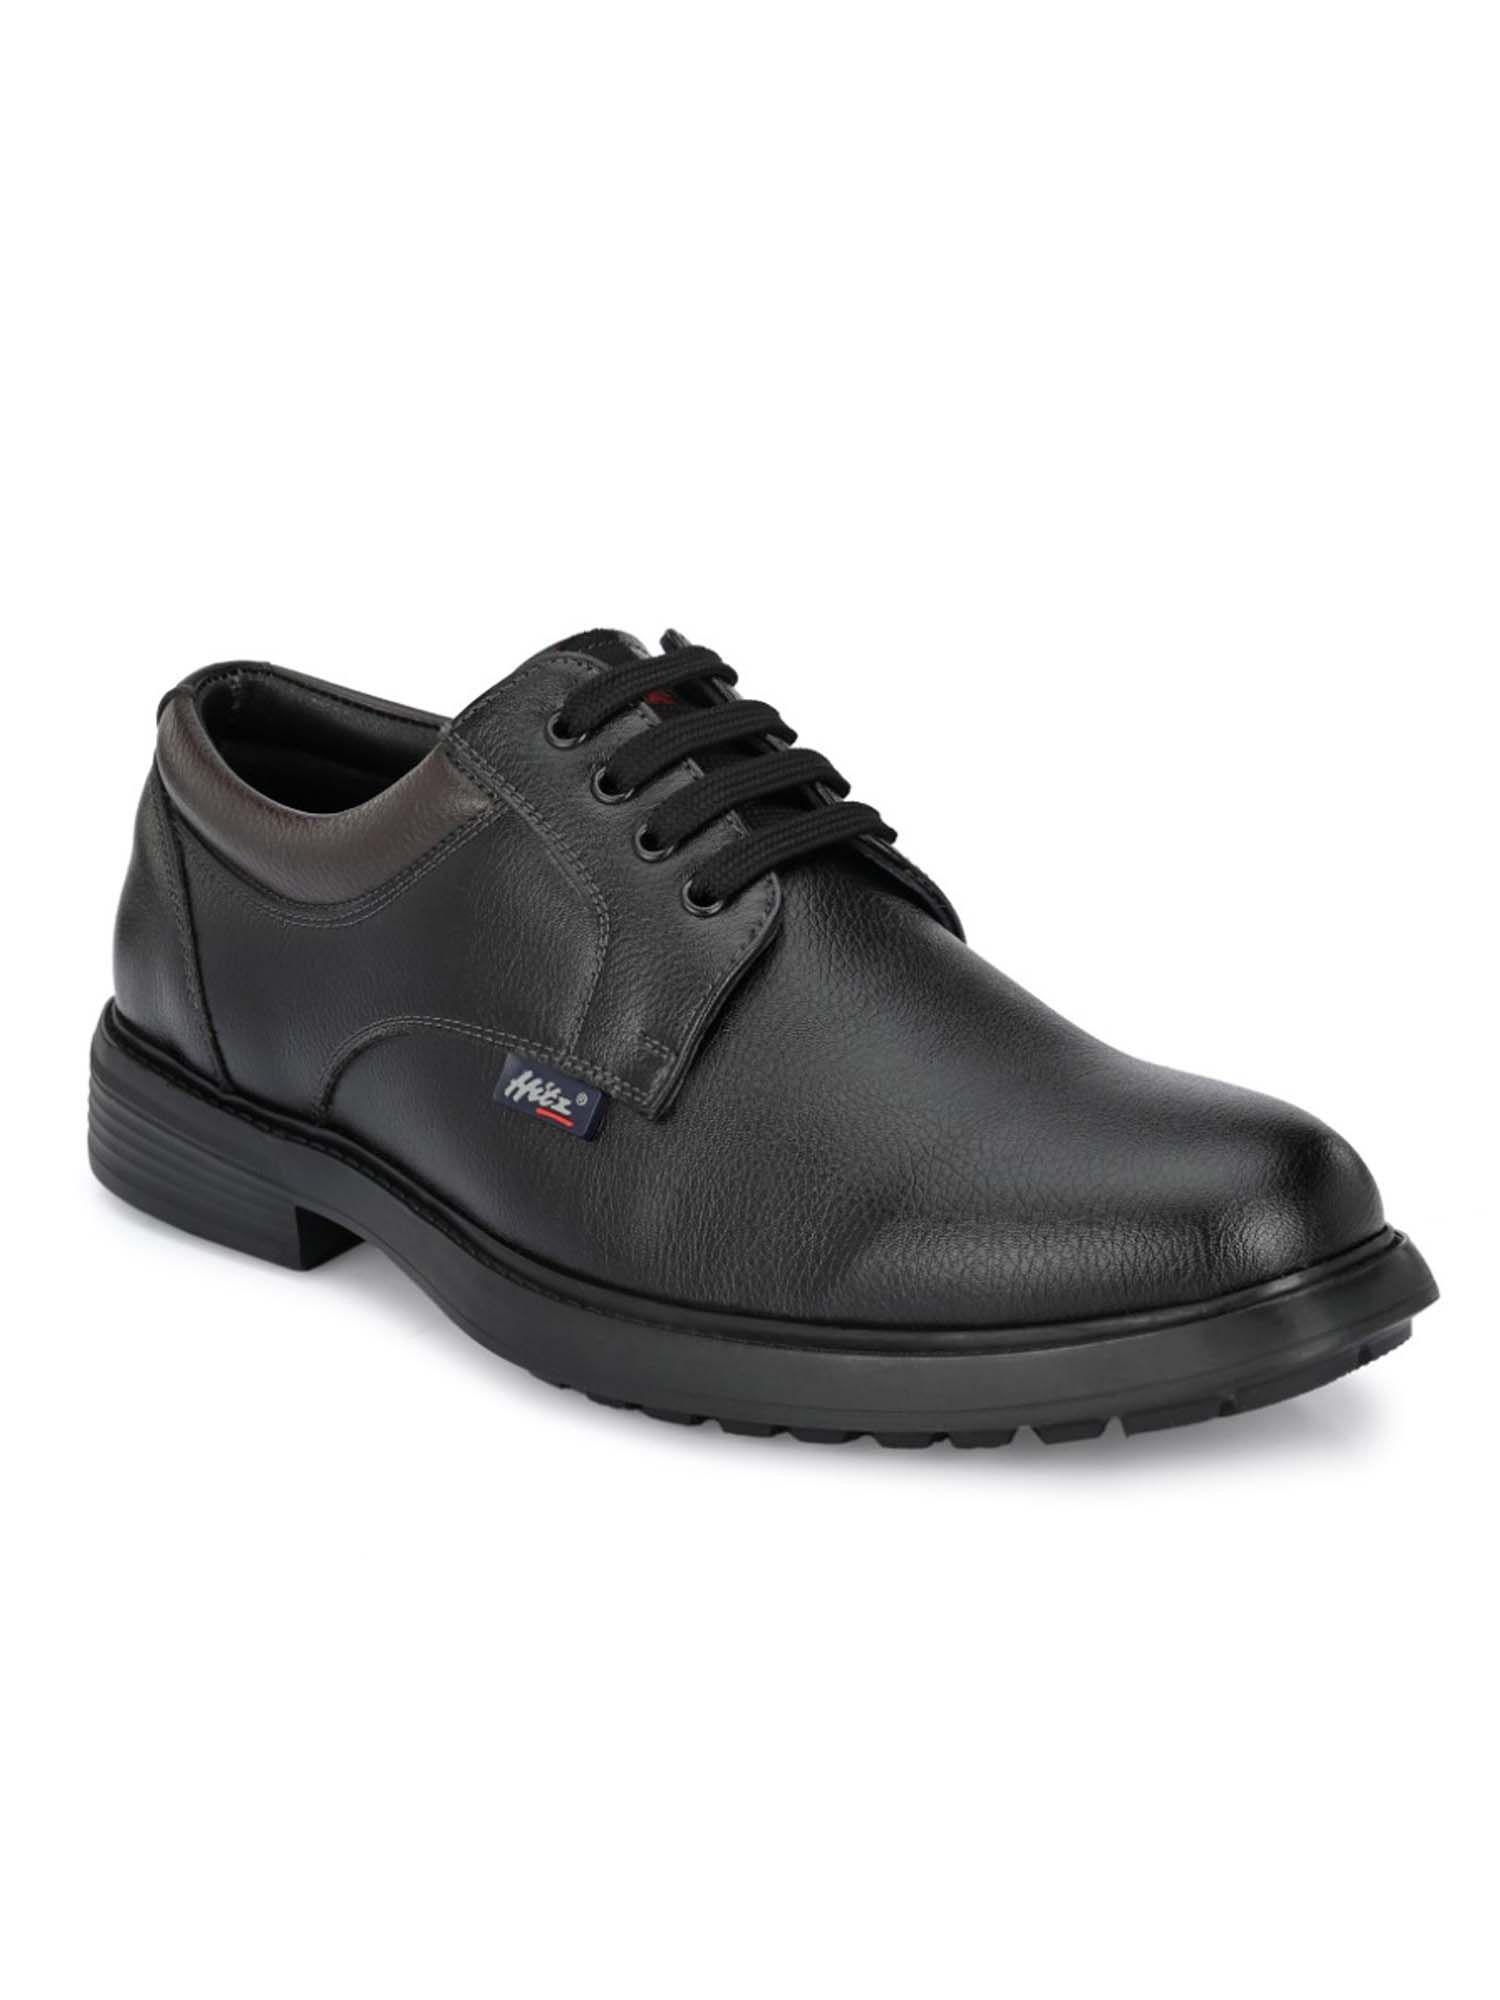 men's-black-synthetic-lace-up-casual-shoes